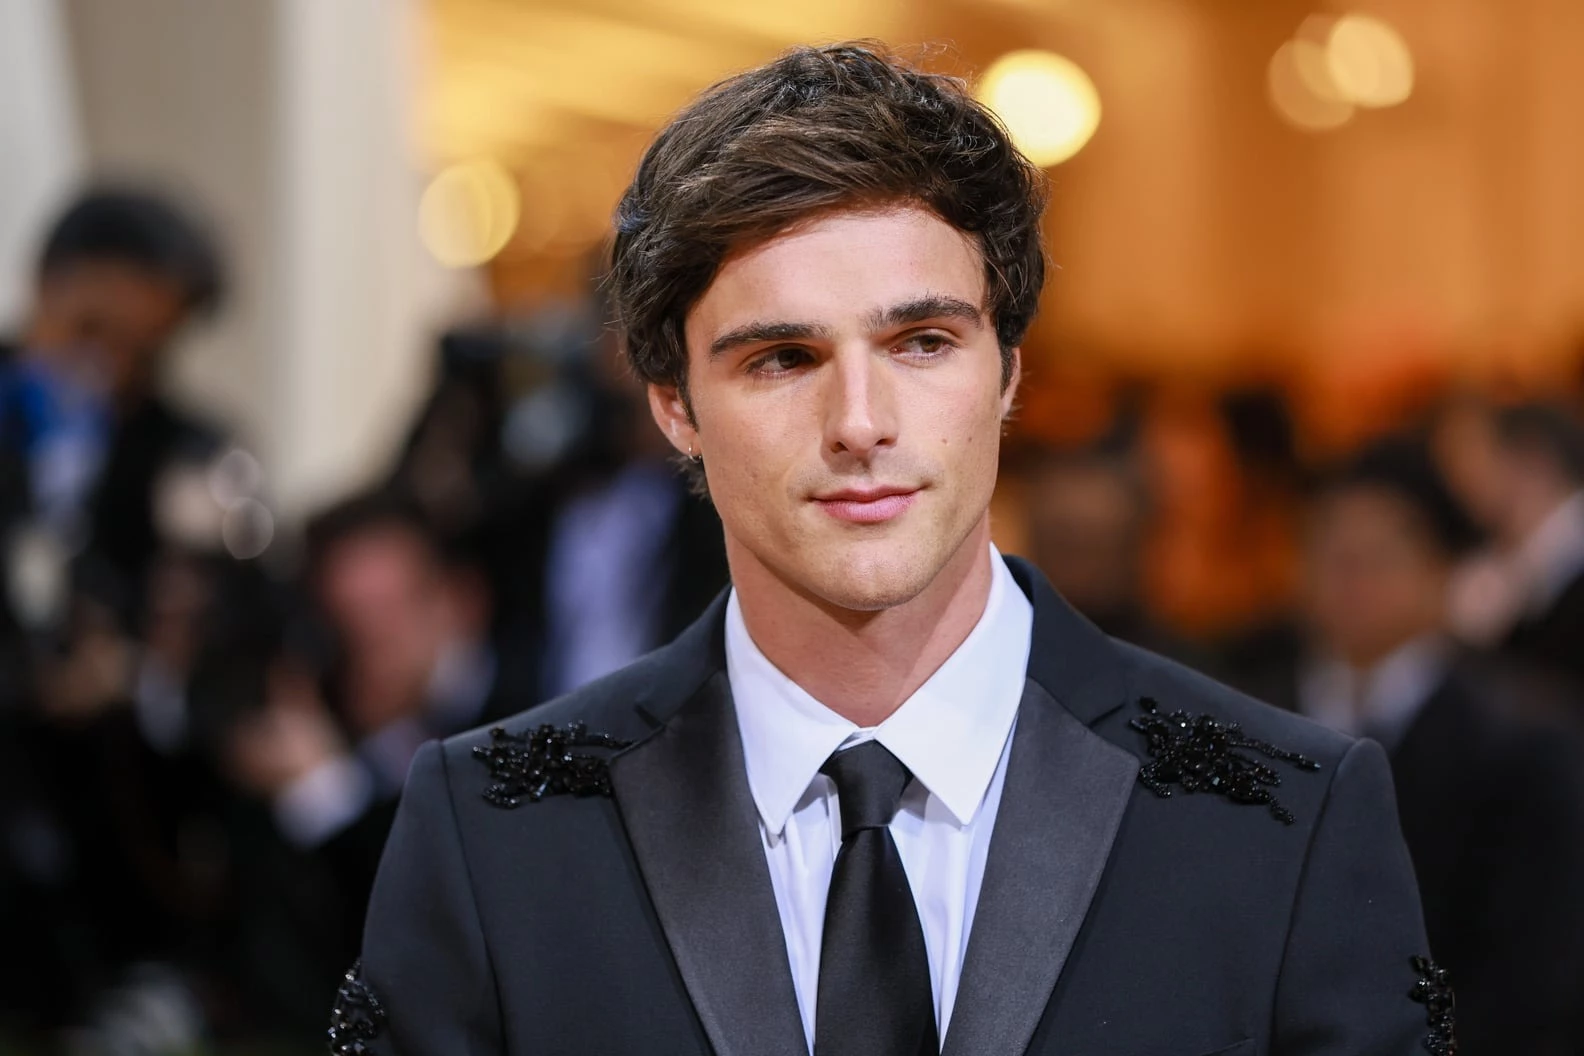 …And Jacob Elordi For Edward Cullen